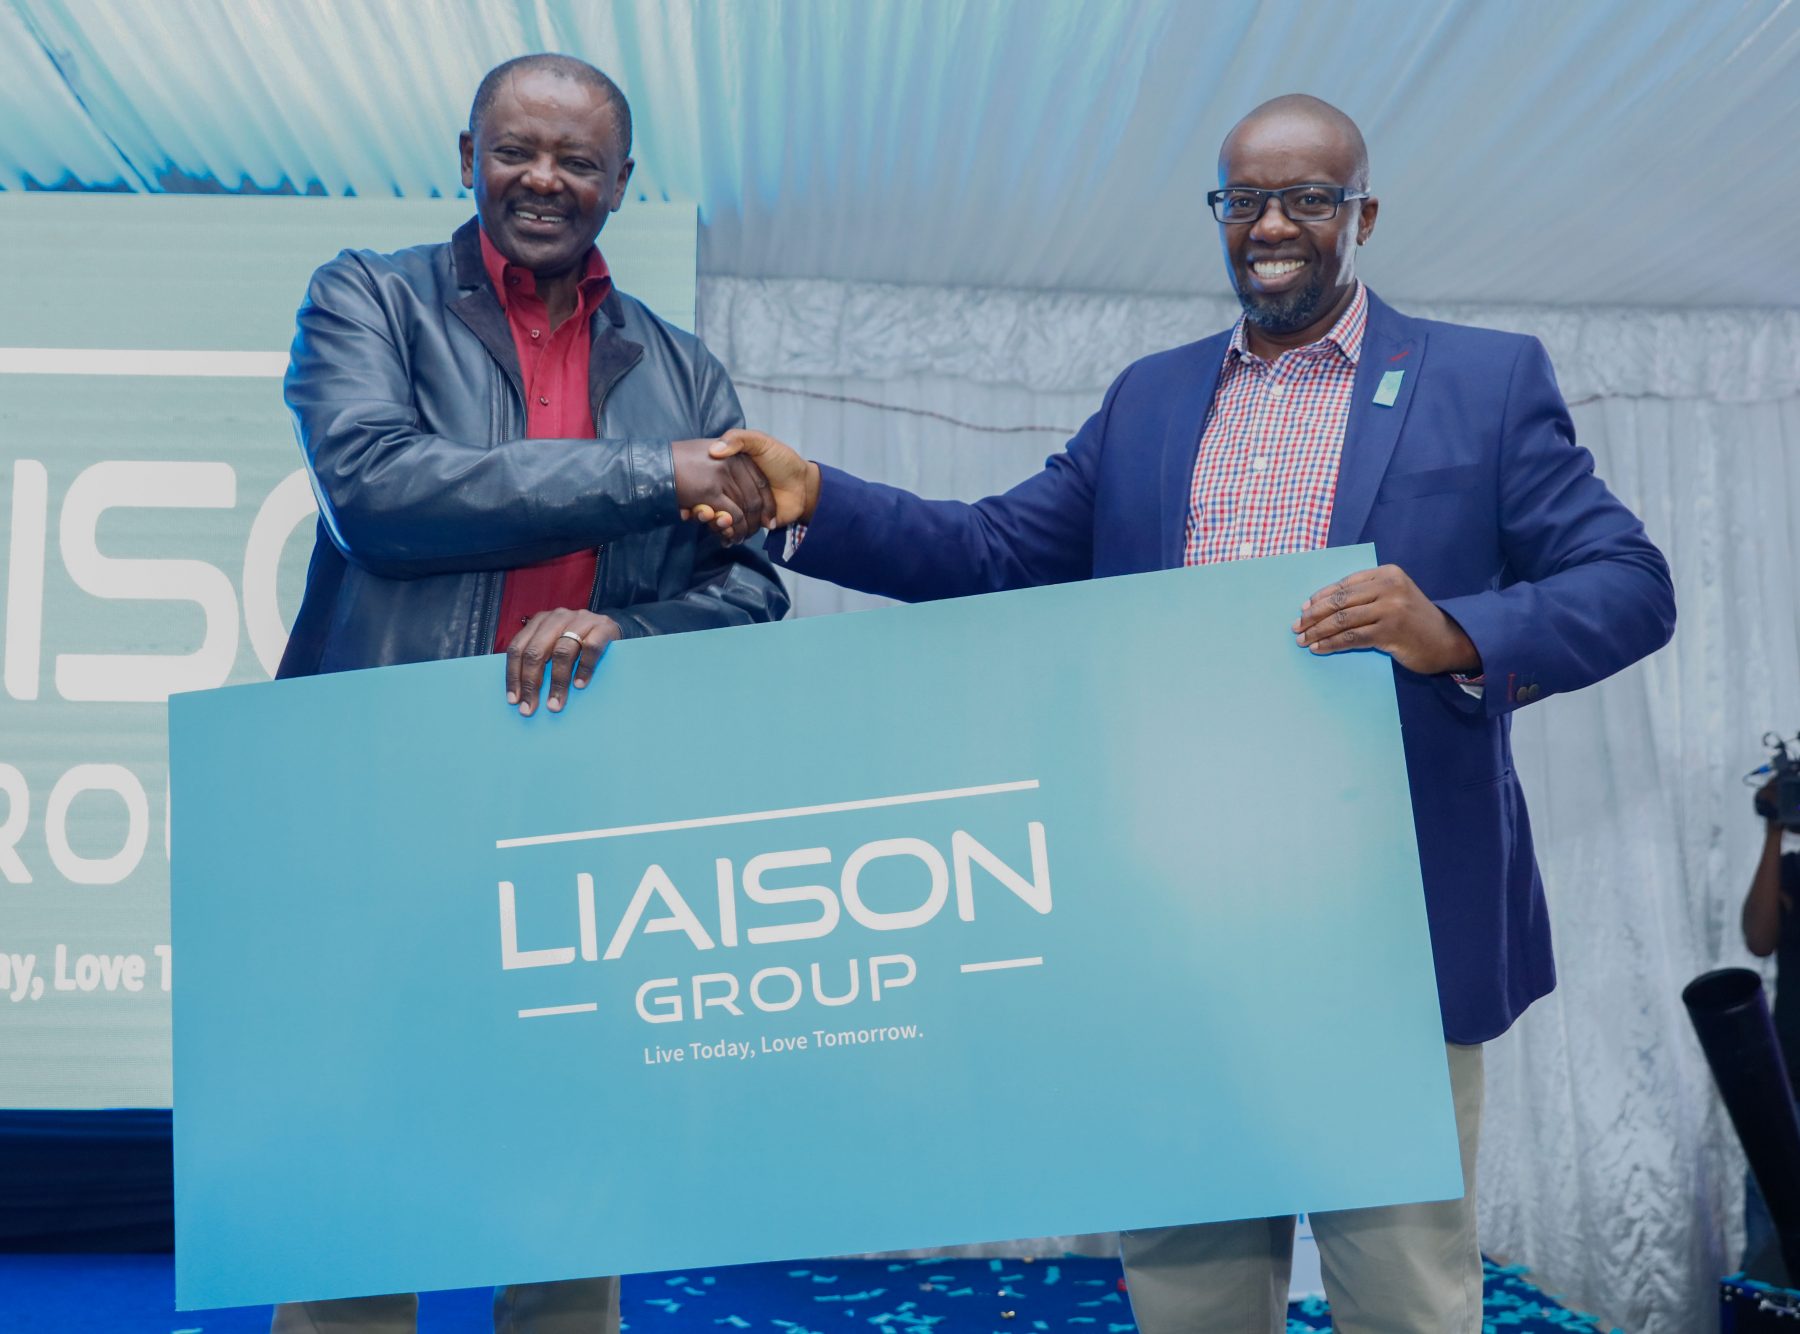 Group Managing Director Liaison Group Mr. Tom Mulwa (right) and Chairman of Liaison Group Mr. Wachira Mahihu, unveil the new brand identity for Liaison Group